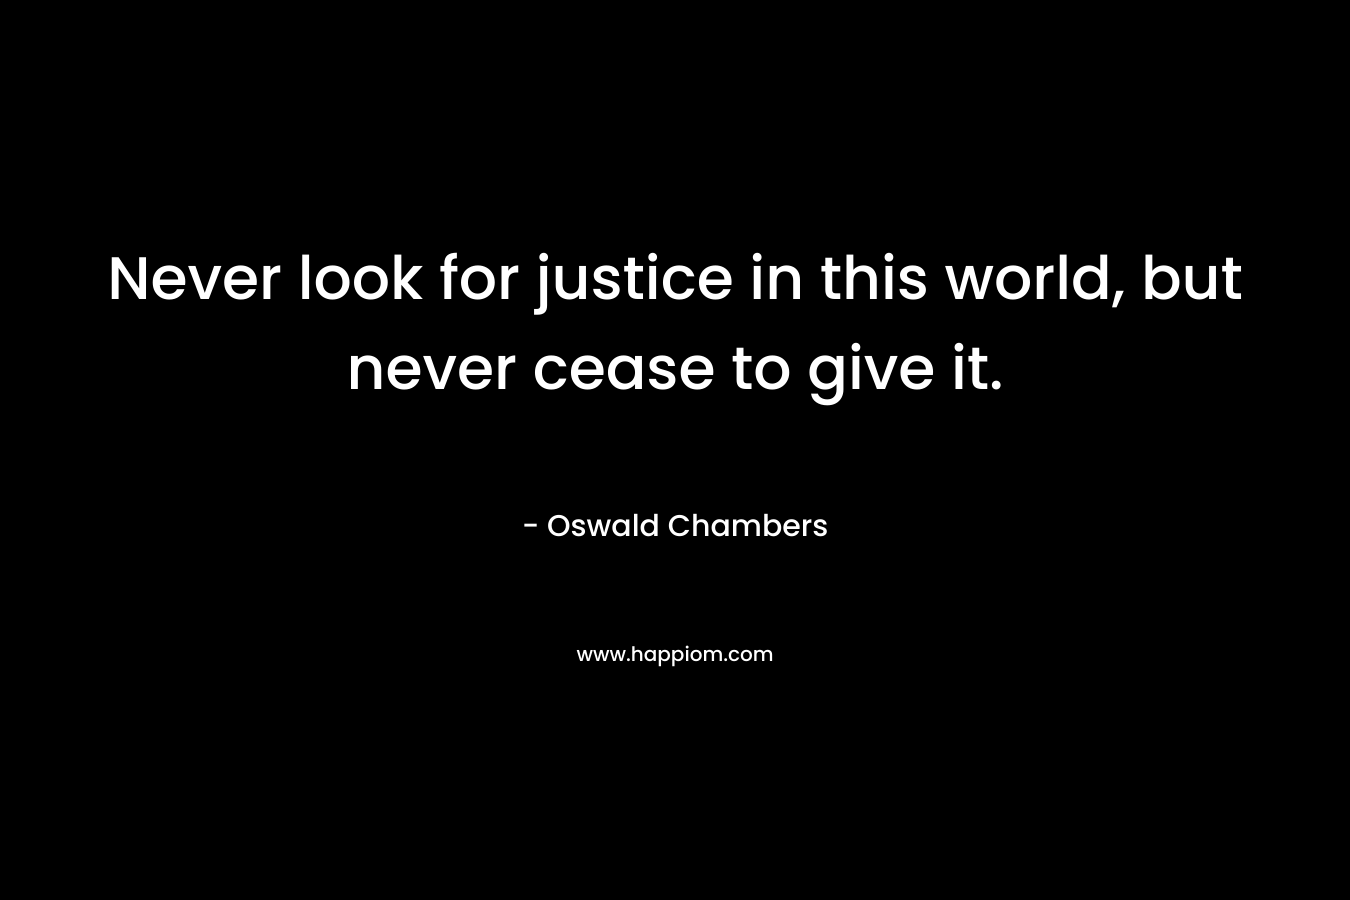 Never look for justice in this world, but never cease to give it.